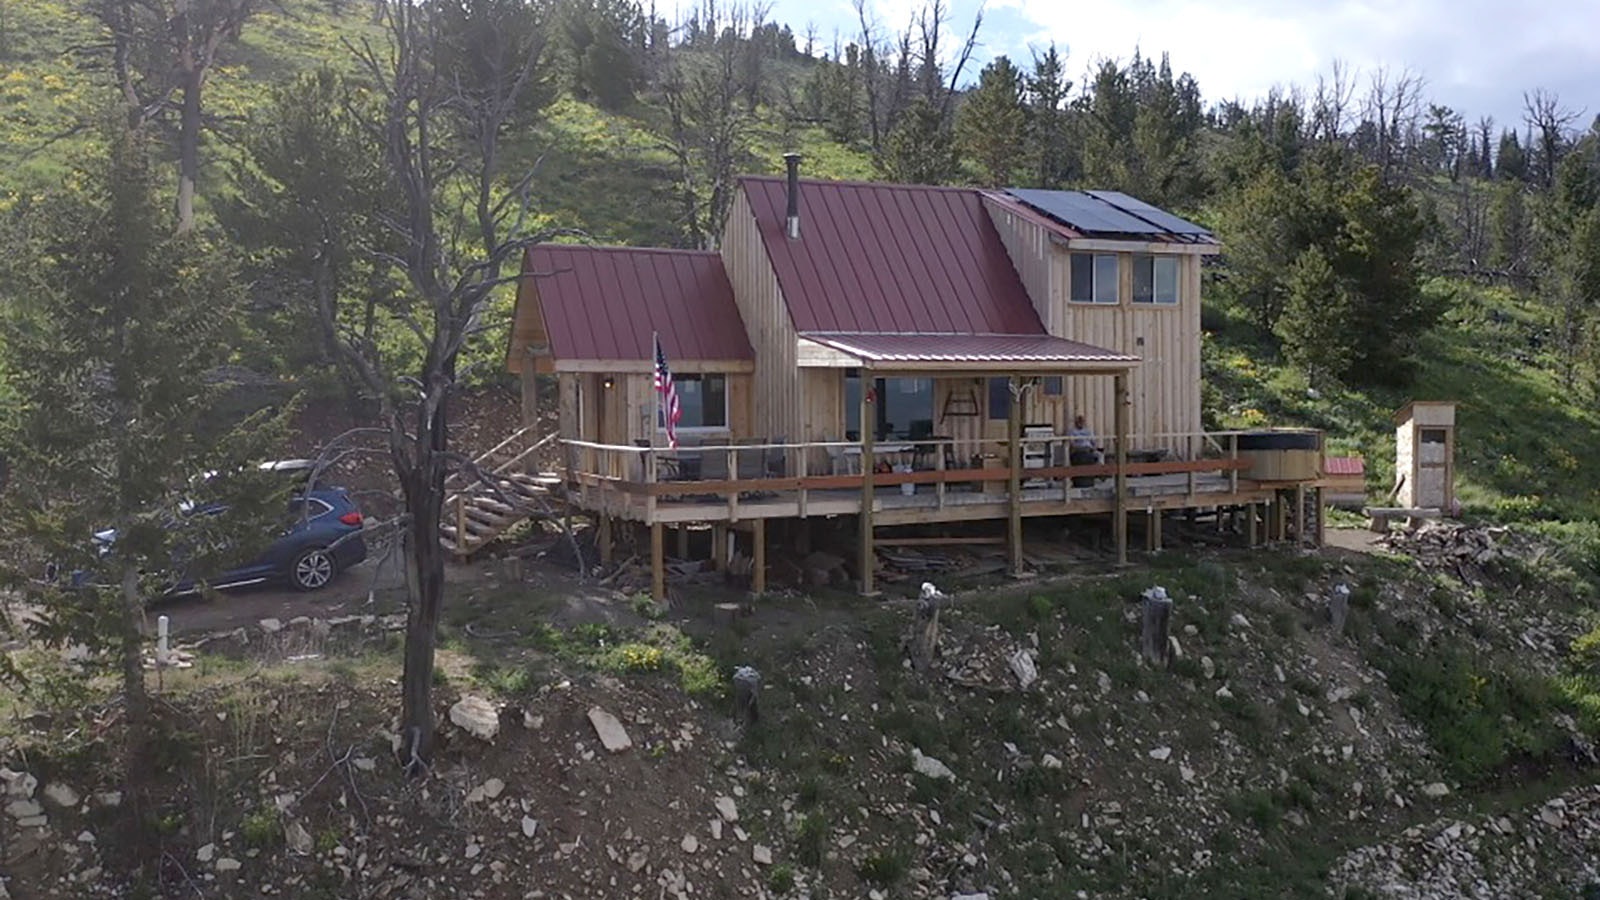 Cody Letteire’s off-grid mountain cabin at 9,000 feet has a bank of solar panels on the roof.